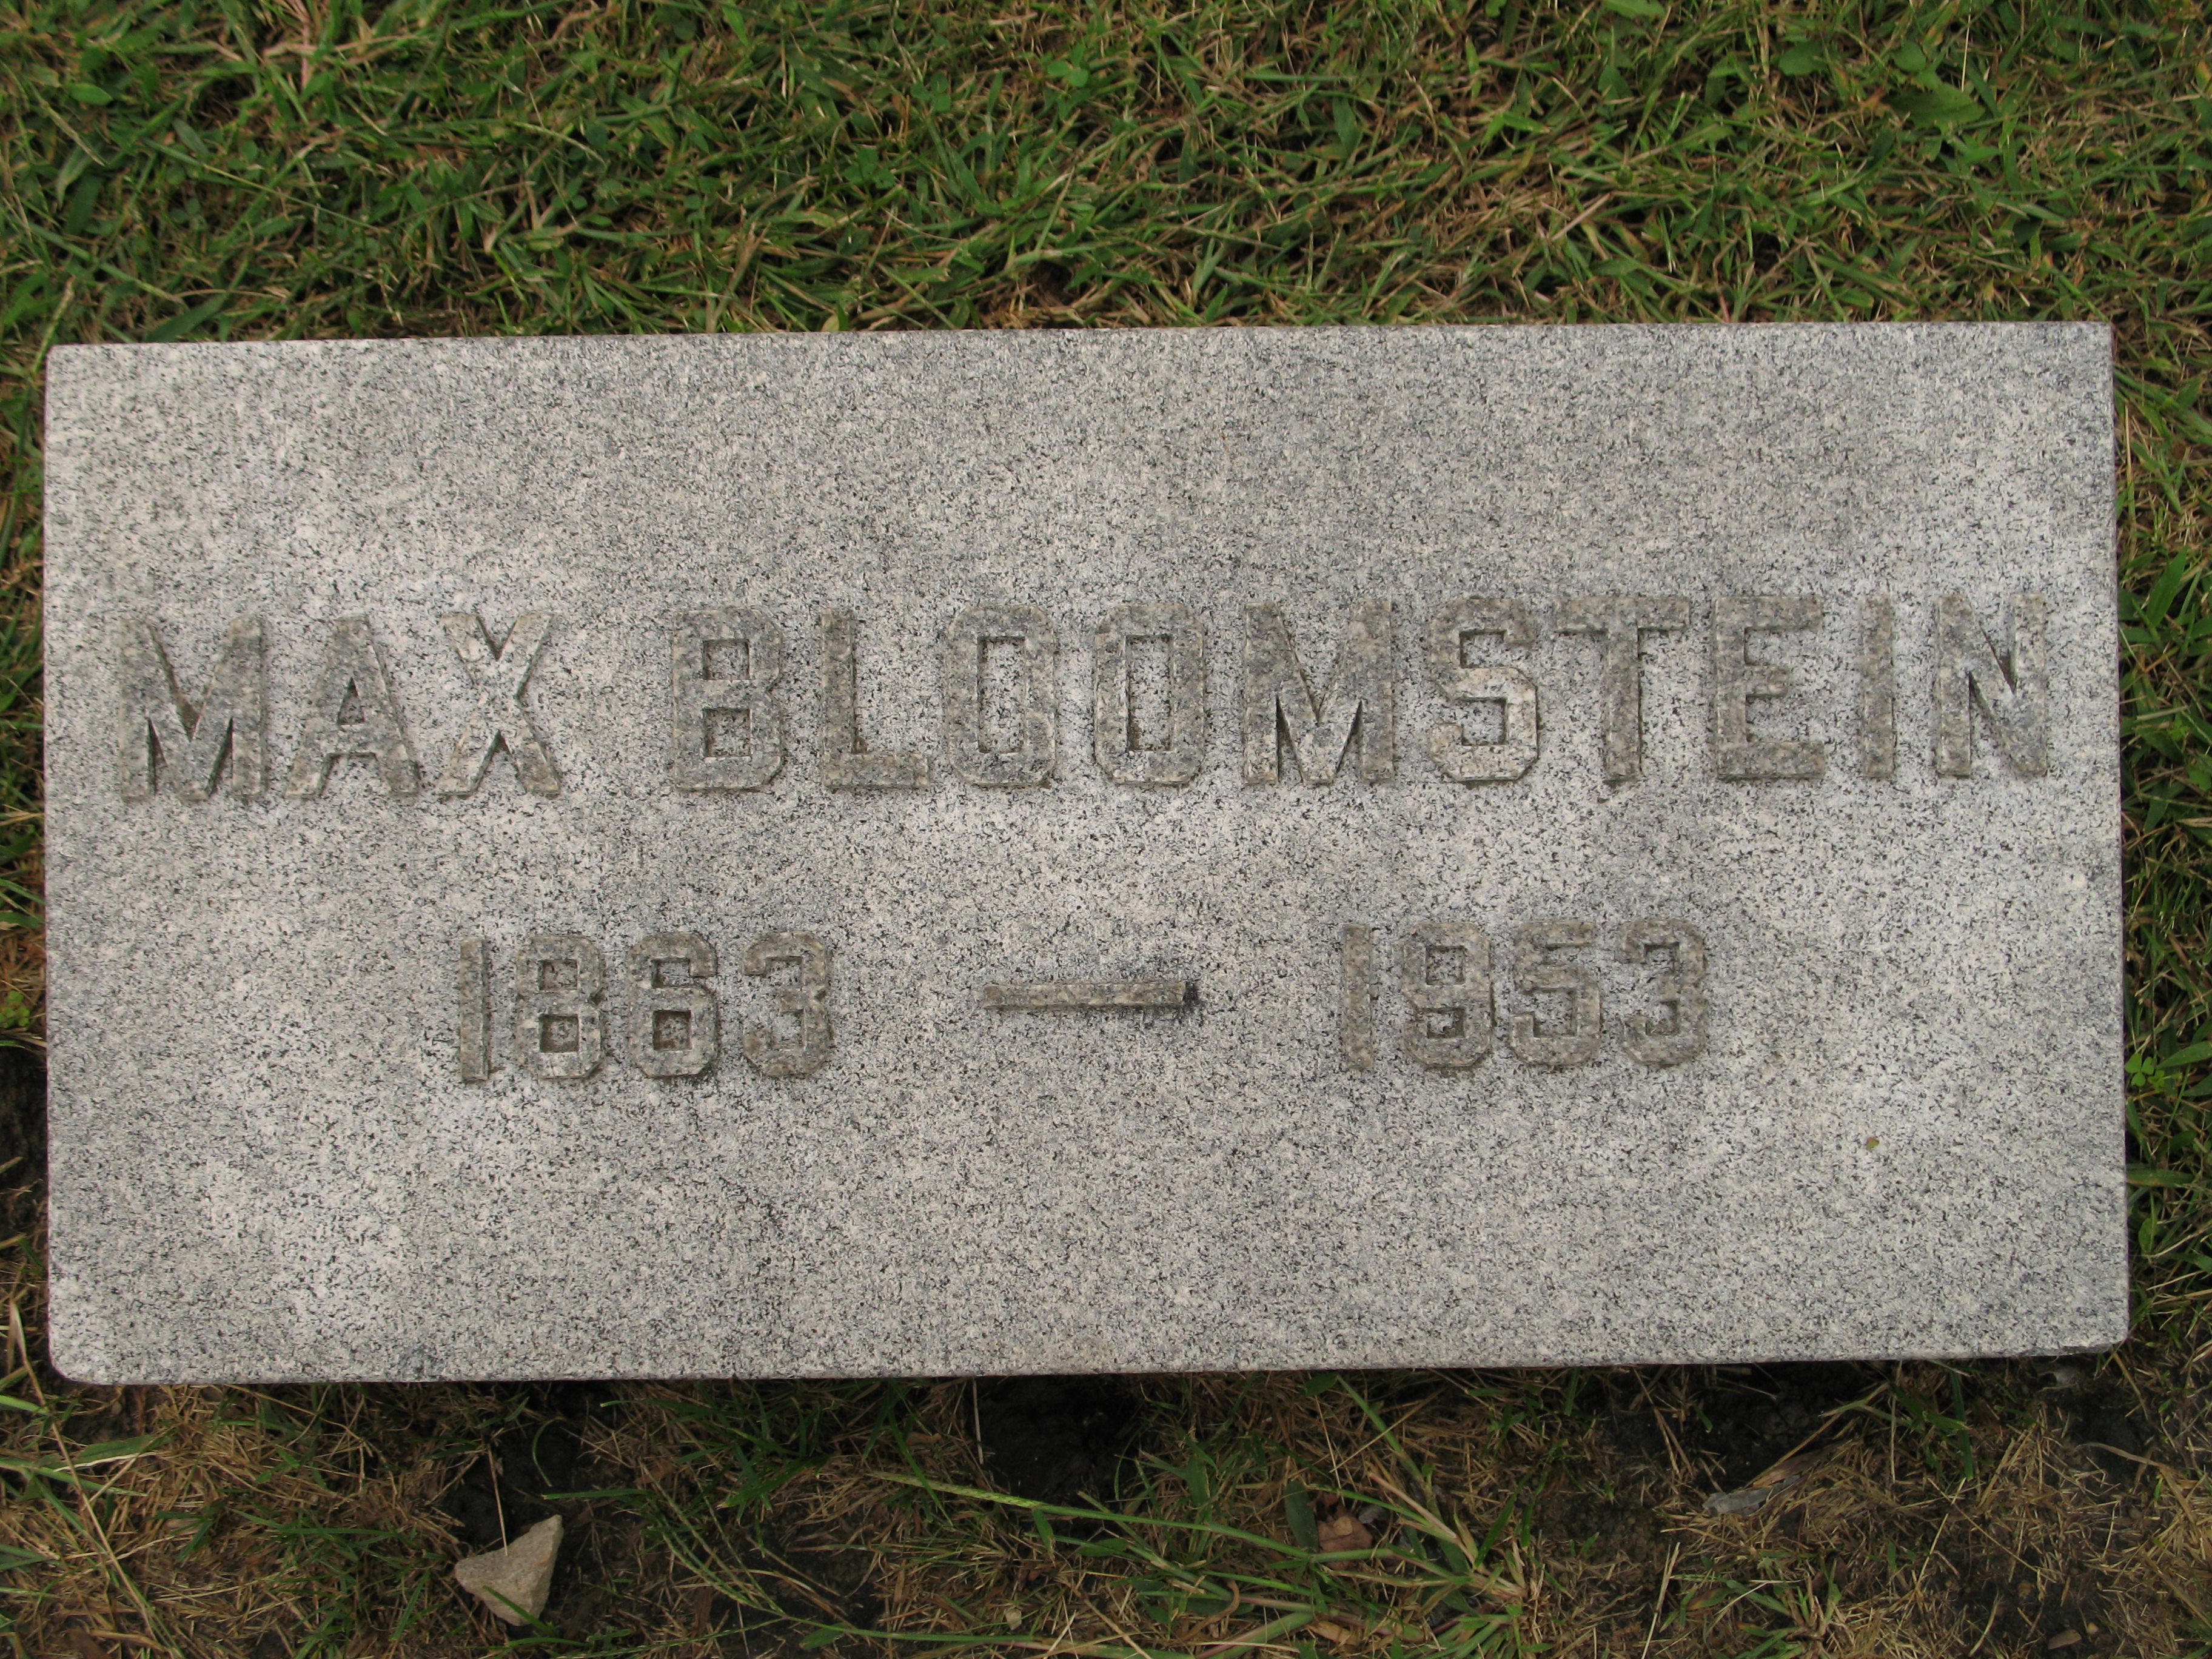 Max Bloomstein headstone